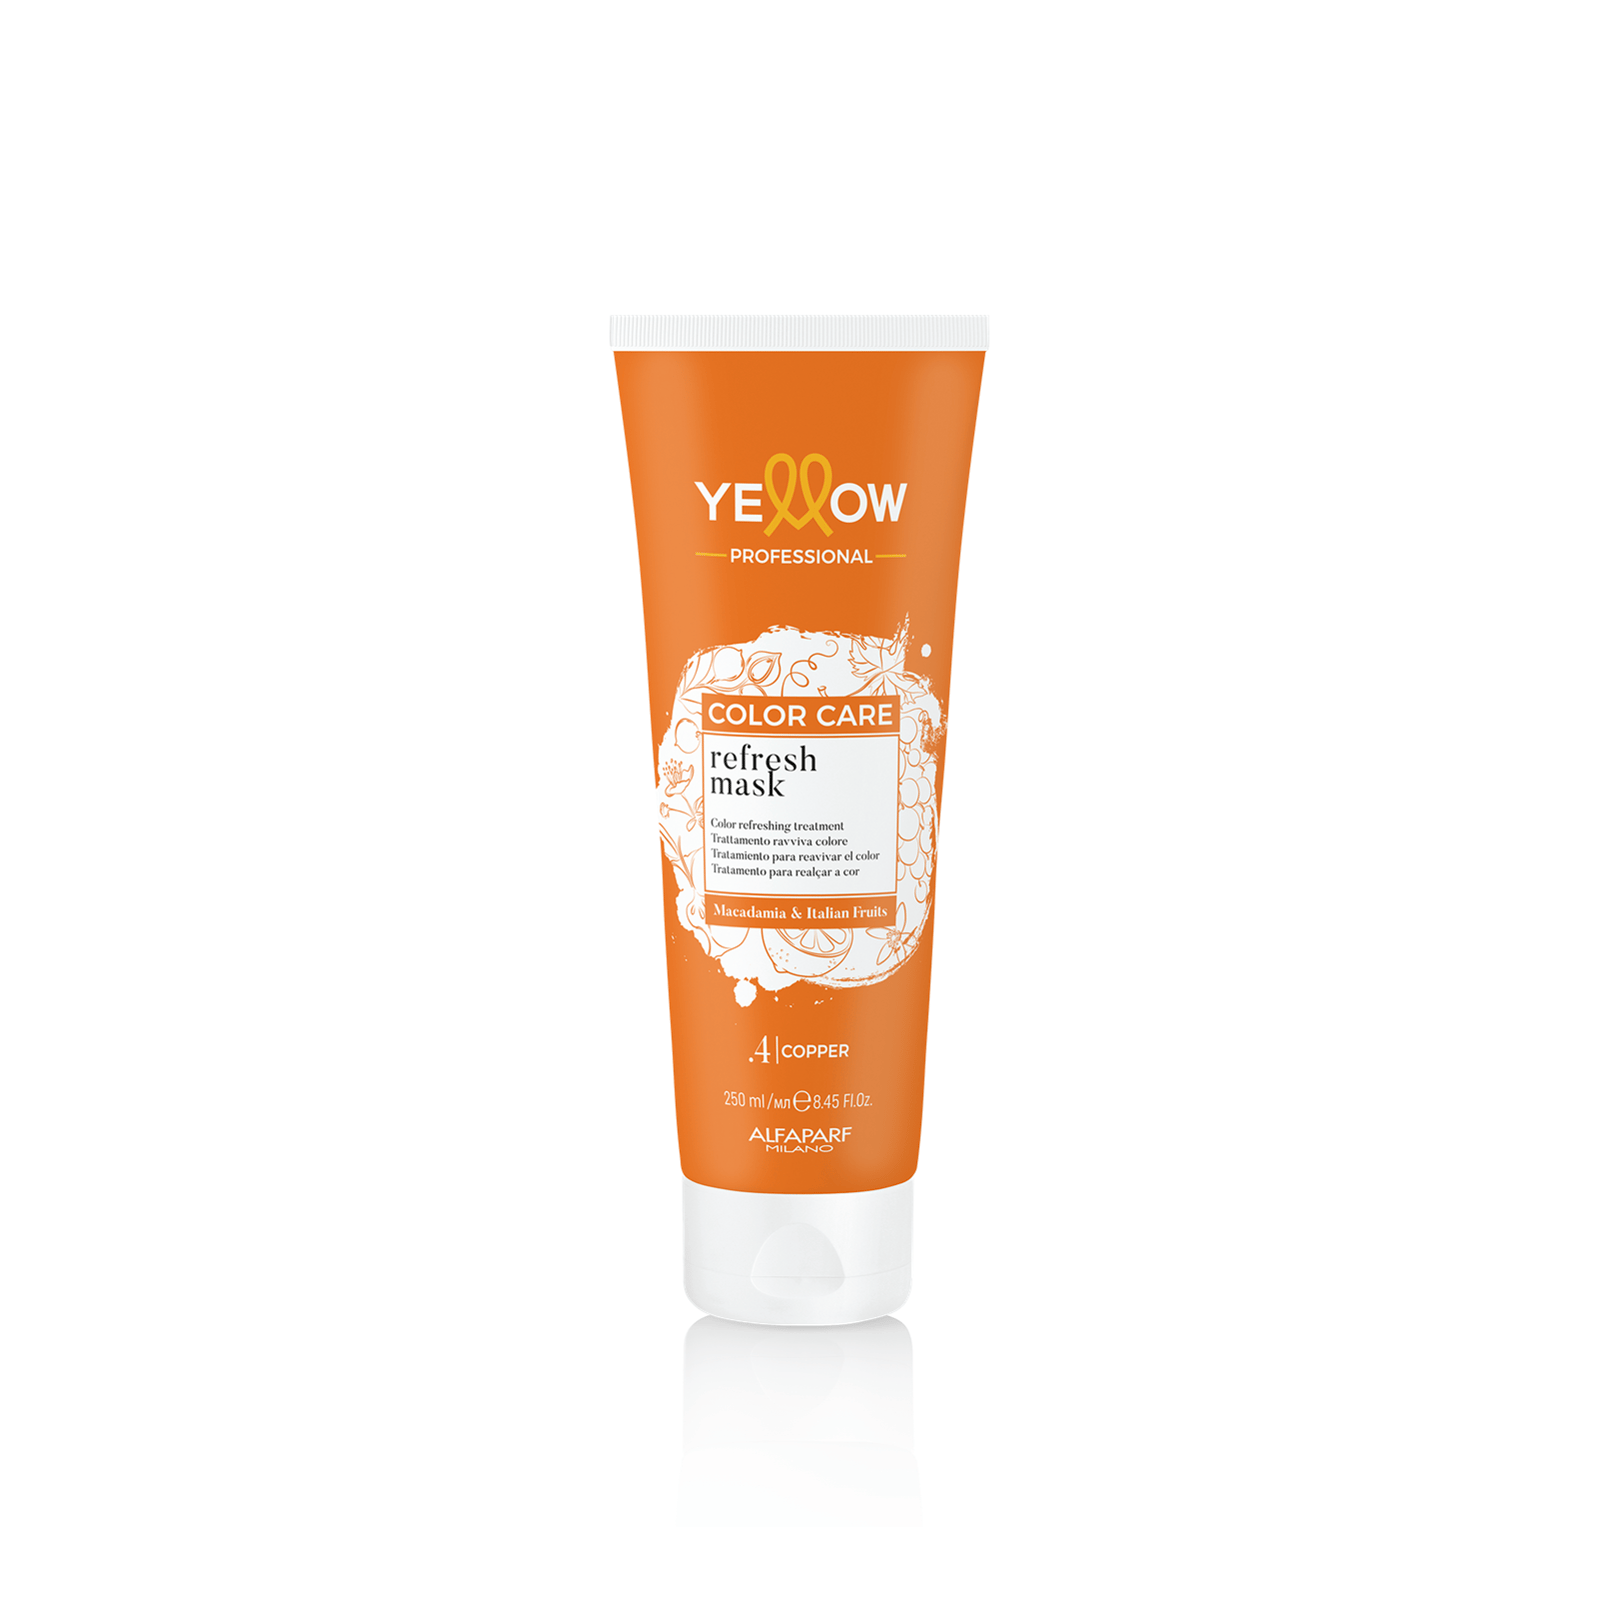 Yellow Professional Color Care Refresh Mask .4 Copper 250ml